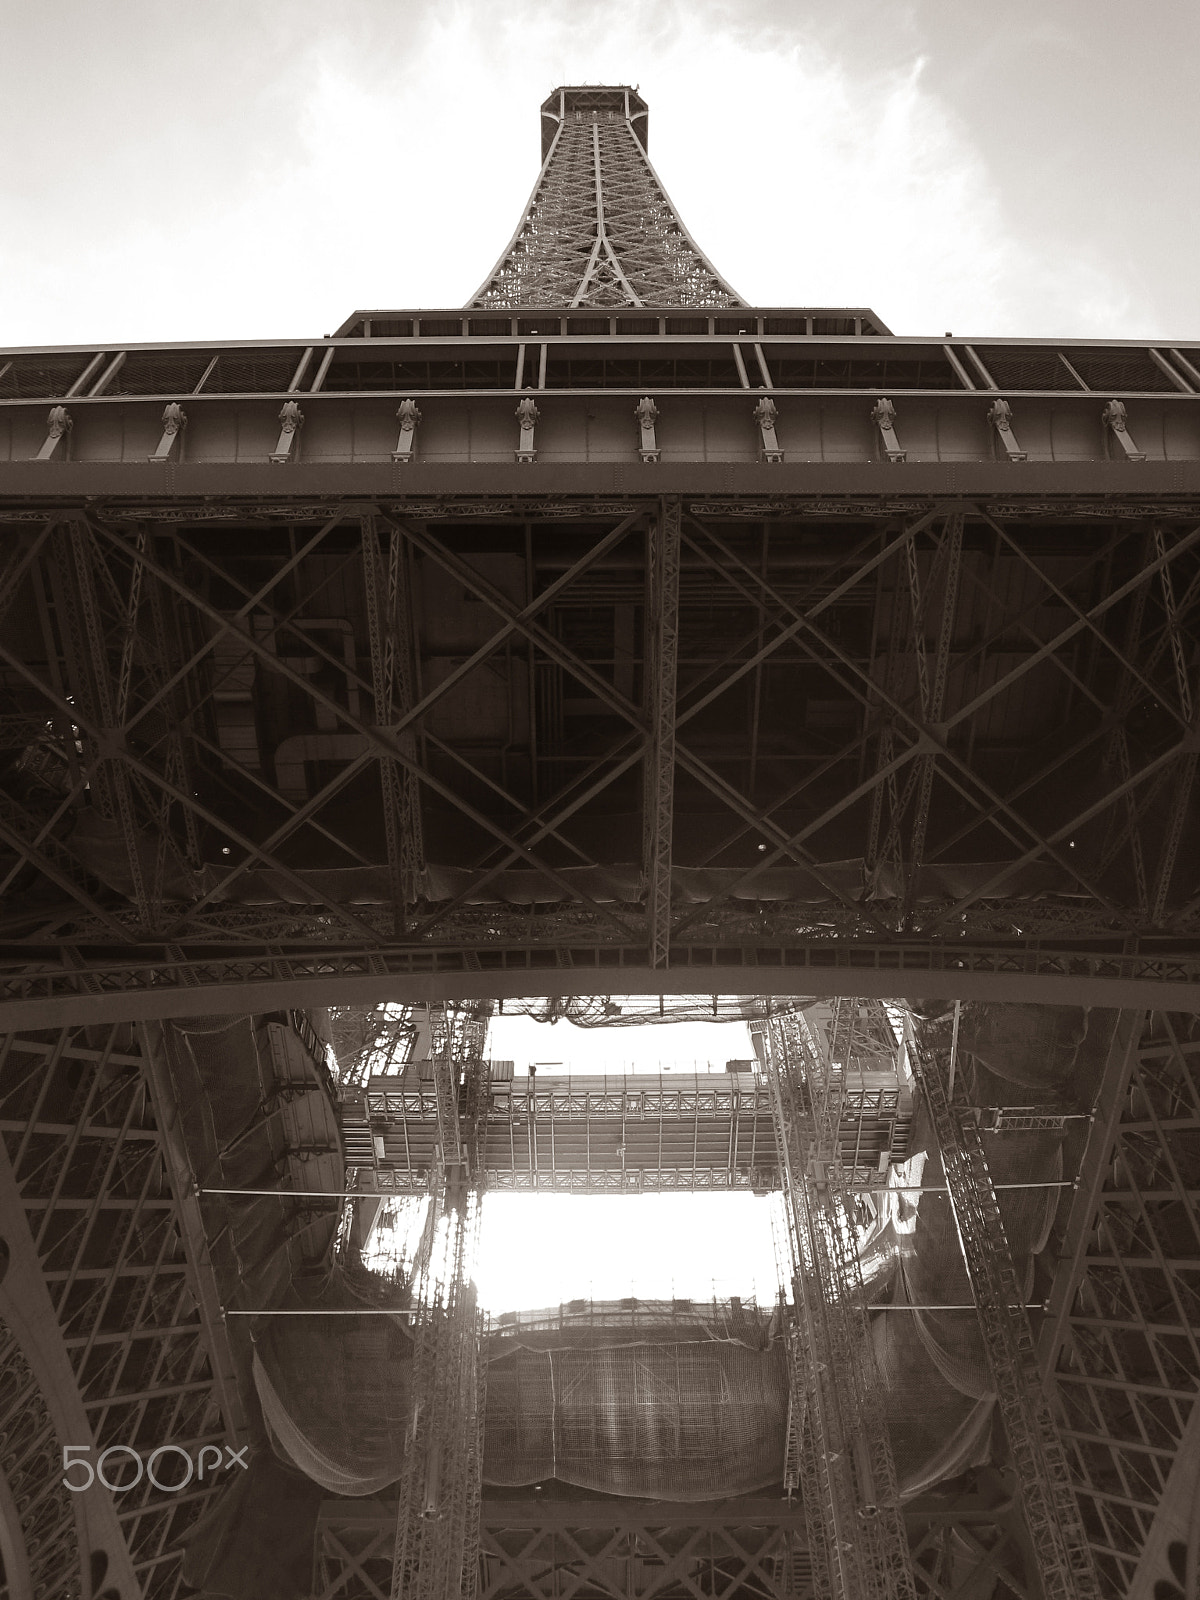 Canon PowerShot SD1200 IS (Digital IXUS 95 IS / IXY Digital 110 IS) sample photo. Under the eiffel tower i photography